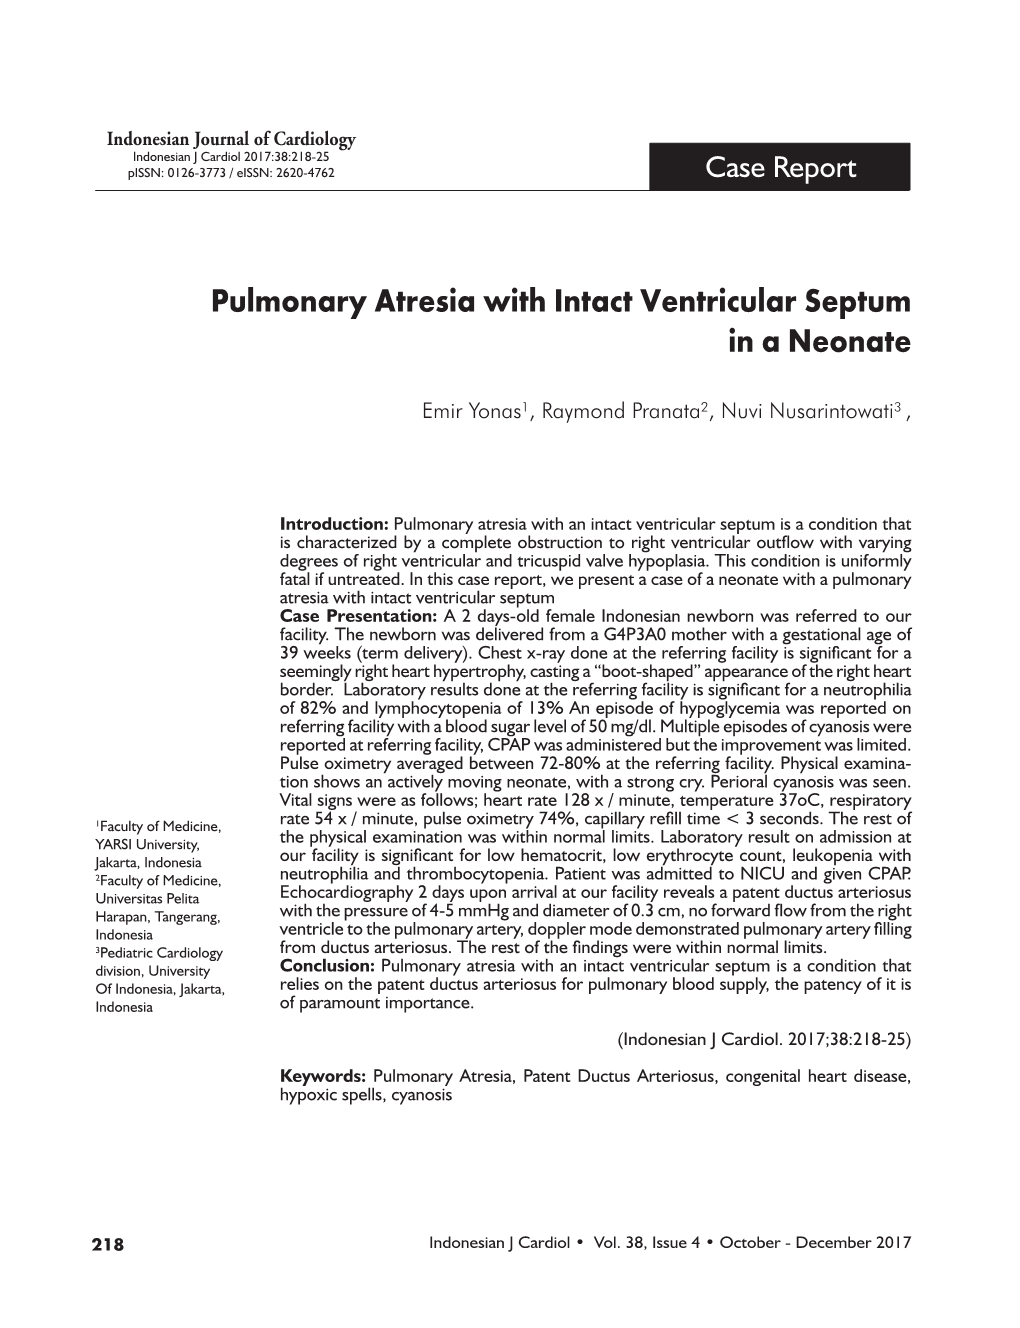 Pulmonary Atresia with Intact Ventricular Septum in a Neonate